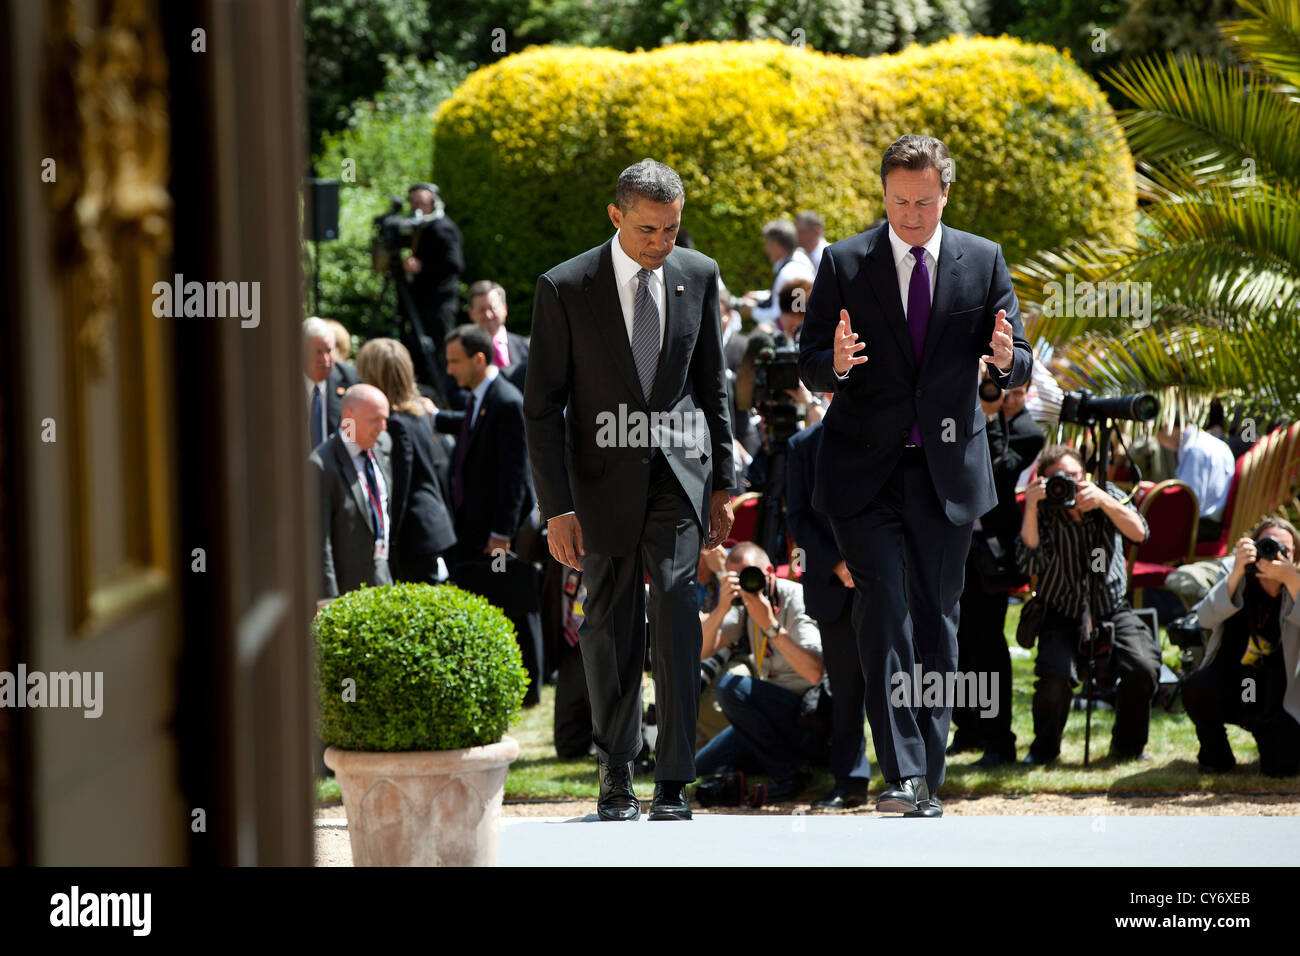 US President Barack Obama and British Prime Minister David Cameron walk together following their joint press conference at Lancaster House May 25, 2011 in London, England. Stock Photo